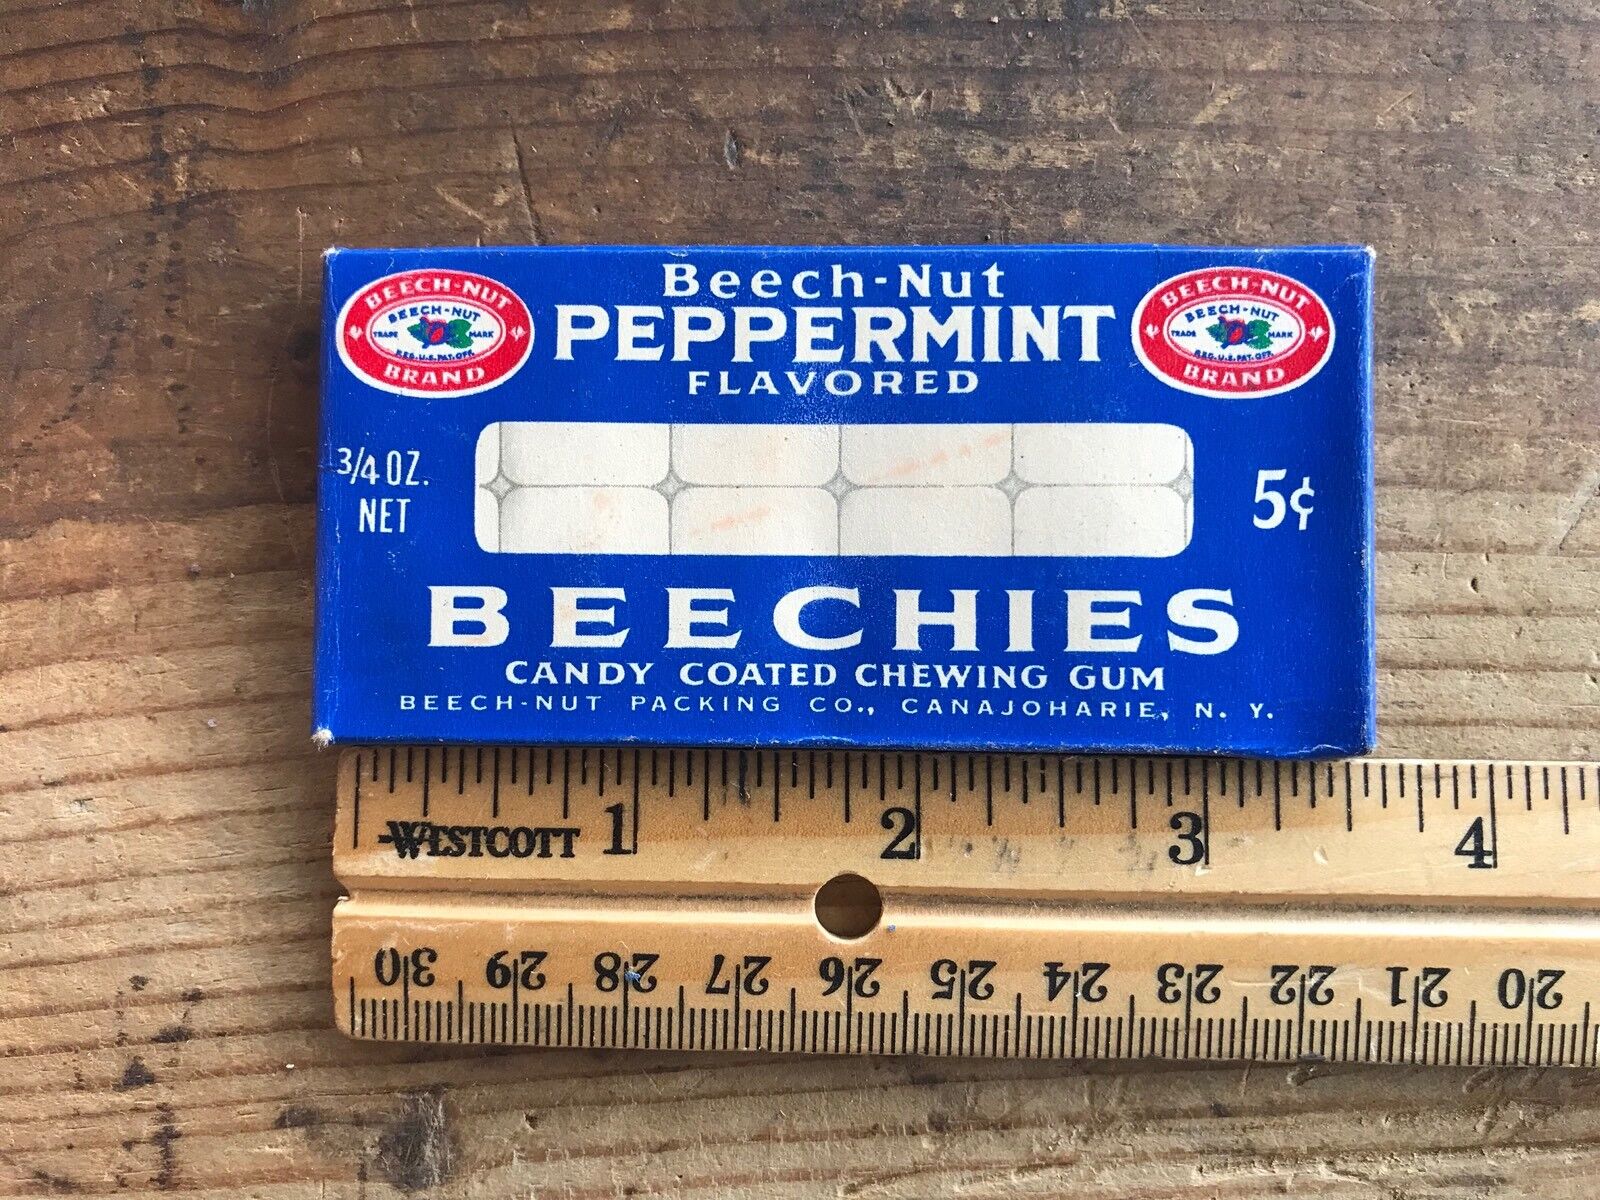 Vtg Beech-Nut Beechies Chewing Gum Package Peppermint 5 Cents Unused 1940’s ?